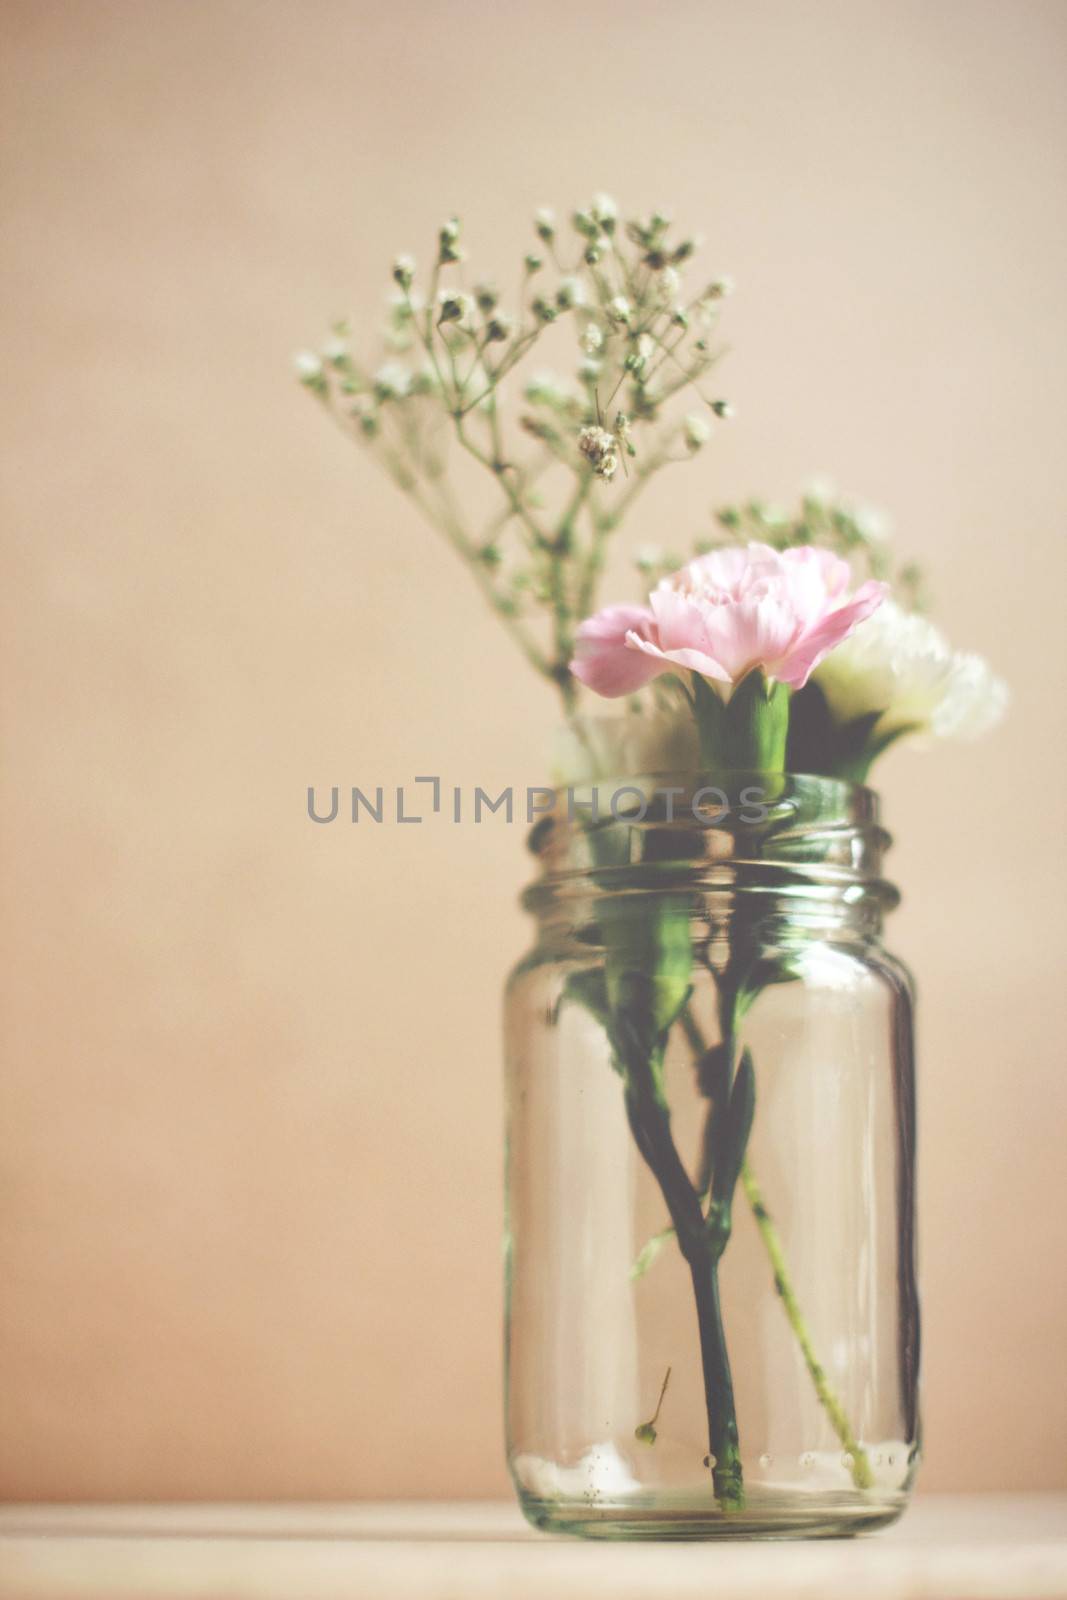 Ornamental flower in glass of jar with retro filter effect